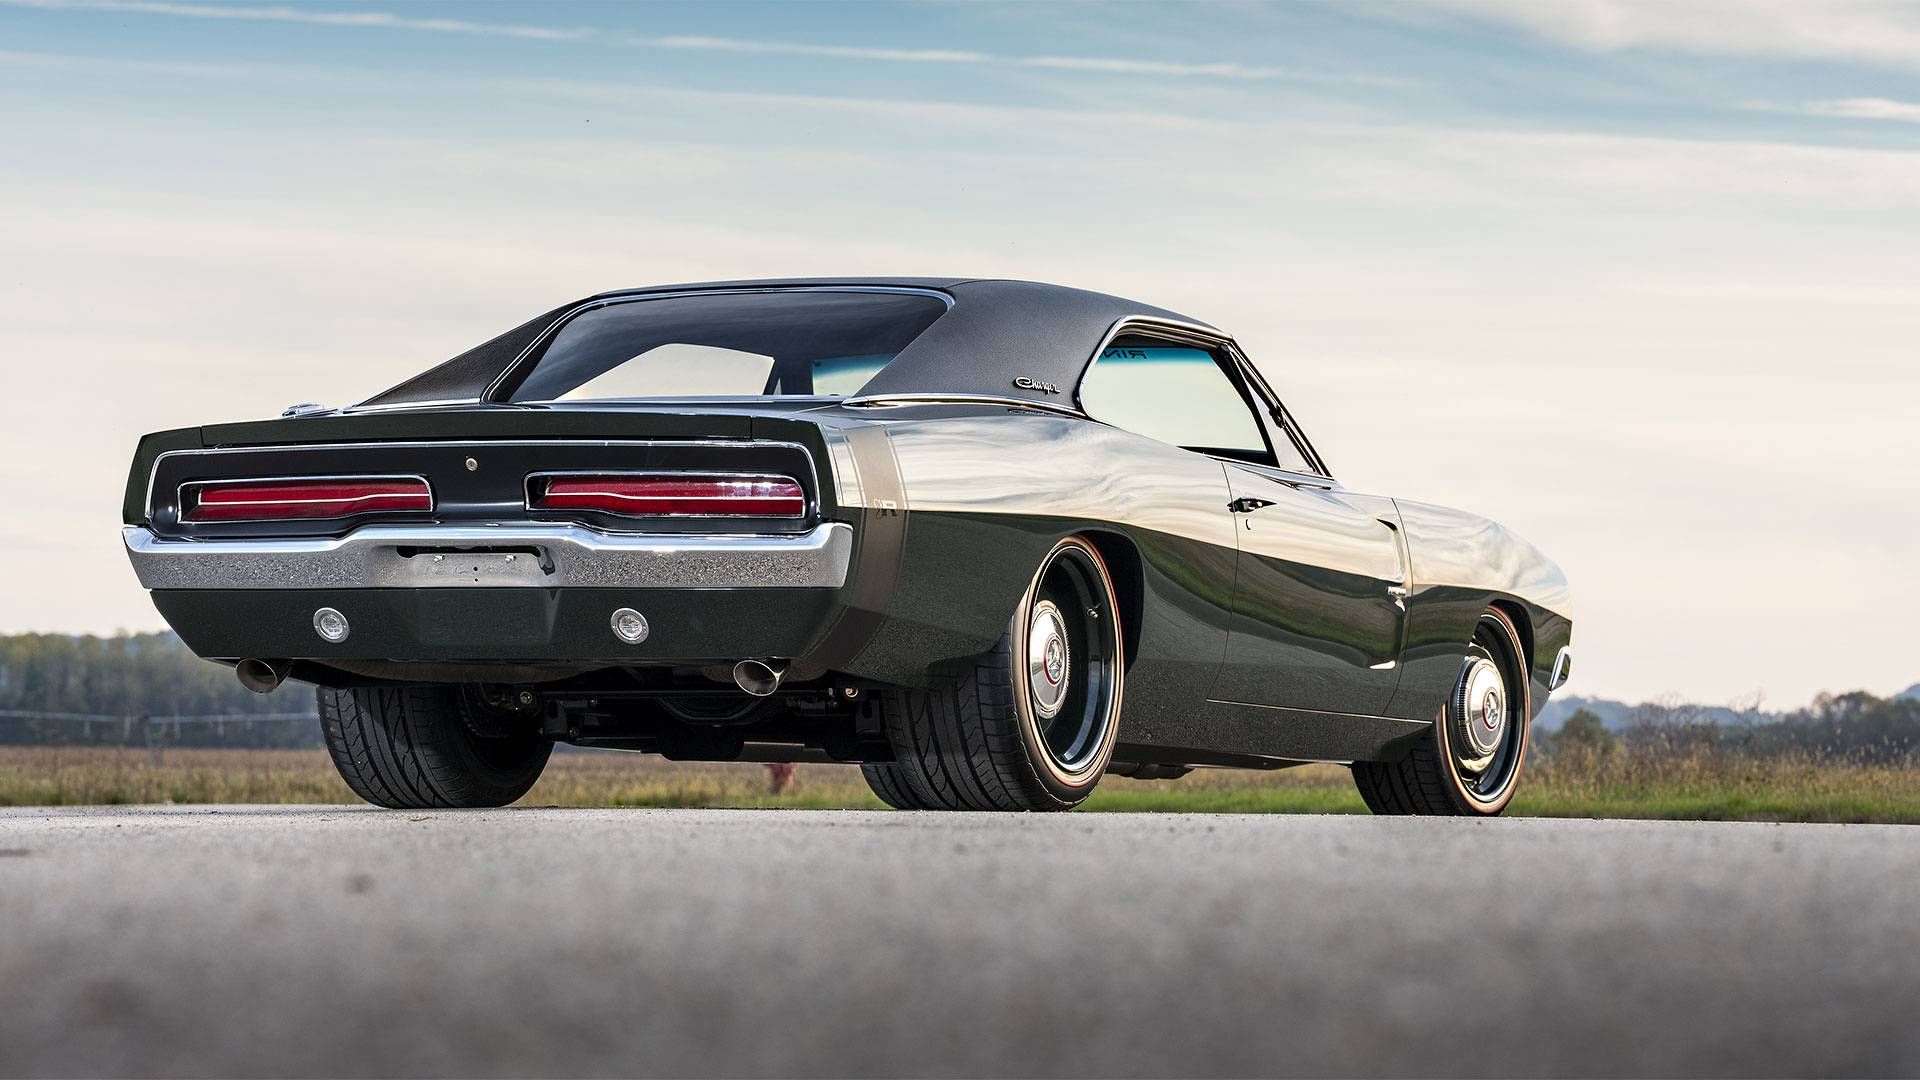 Ringbrothers’ 1969 Dodge Charger ‘Defector’ rear end